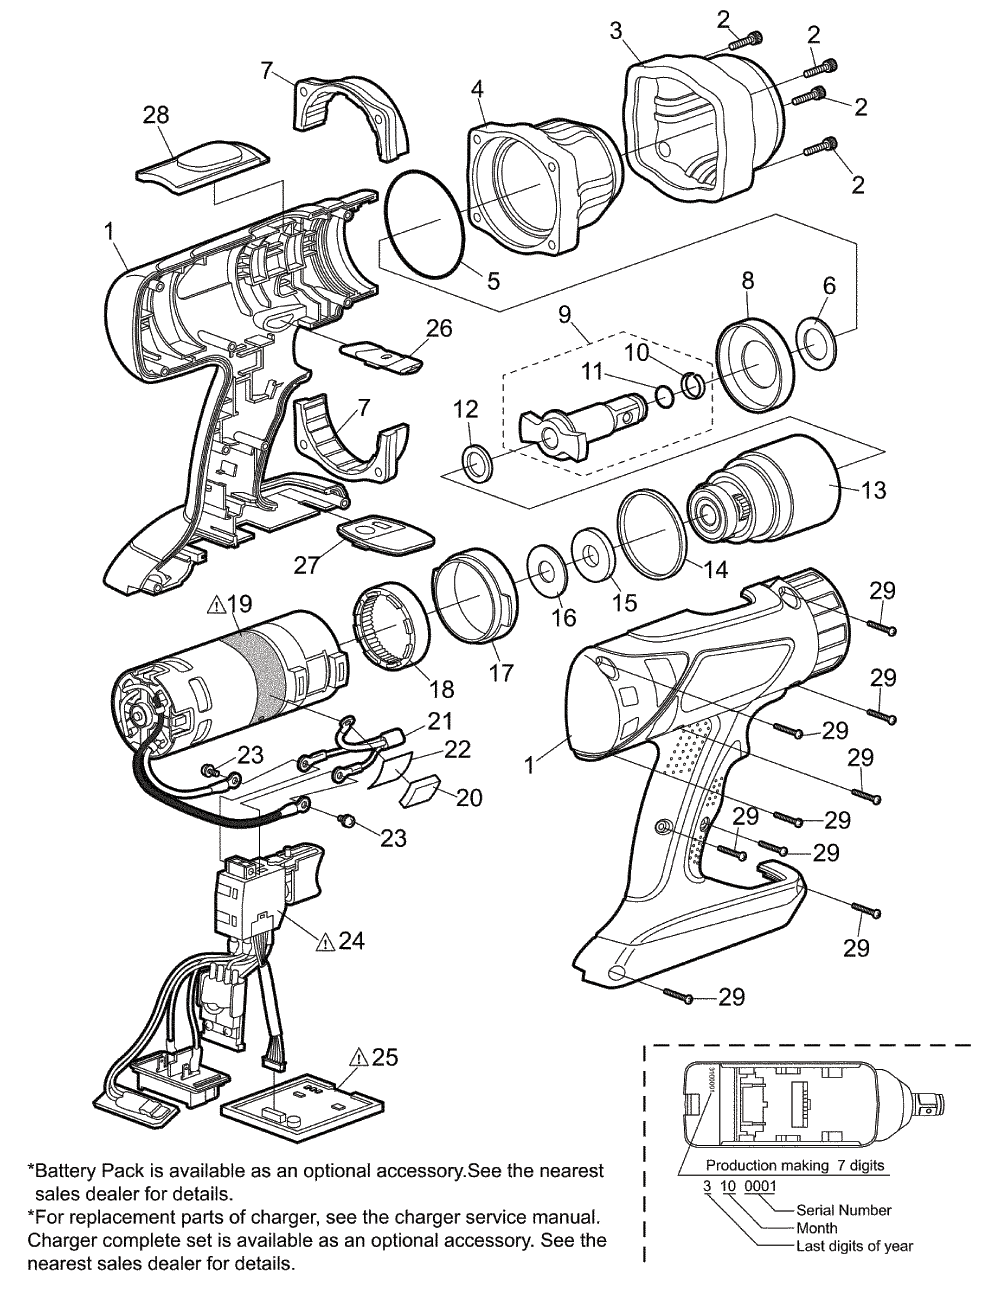 EY7552: Exploded View